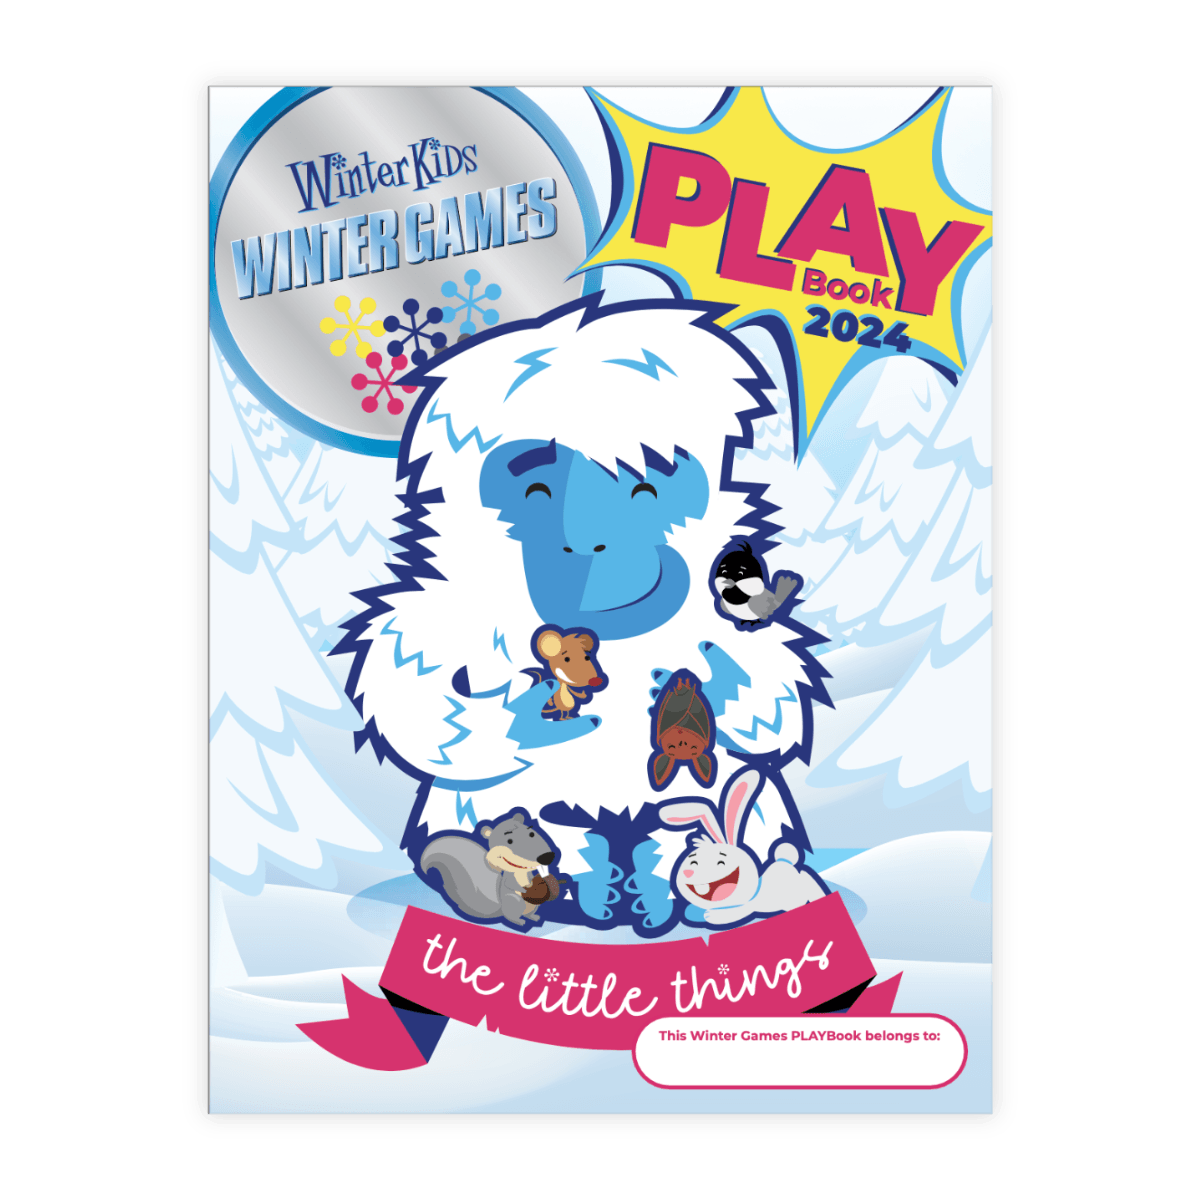 Winter Games Playbook FY24 Preview 2